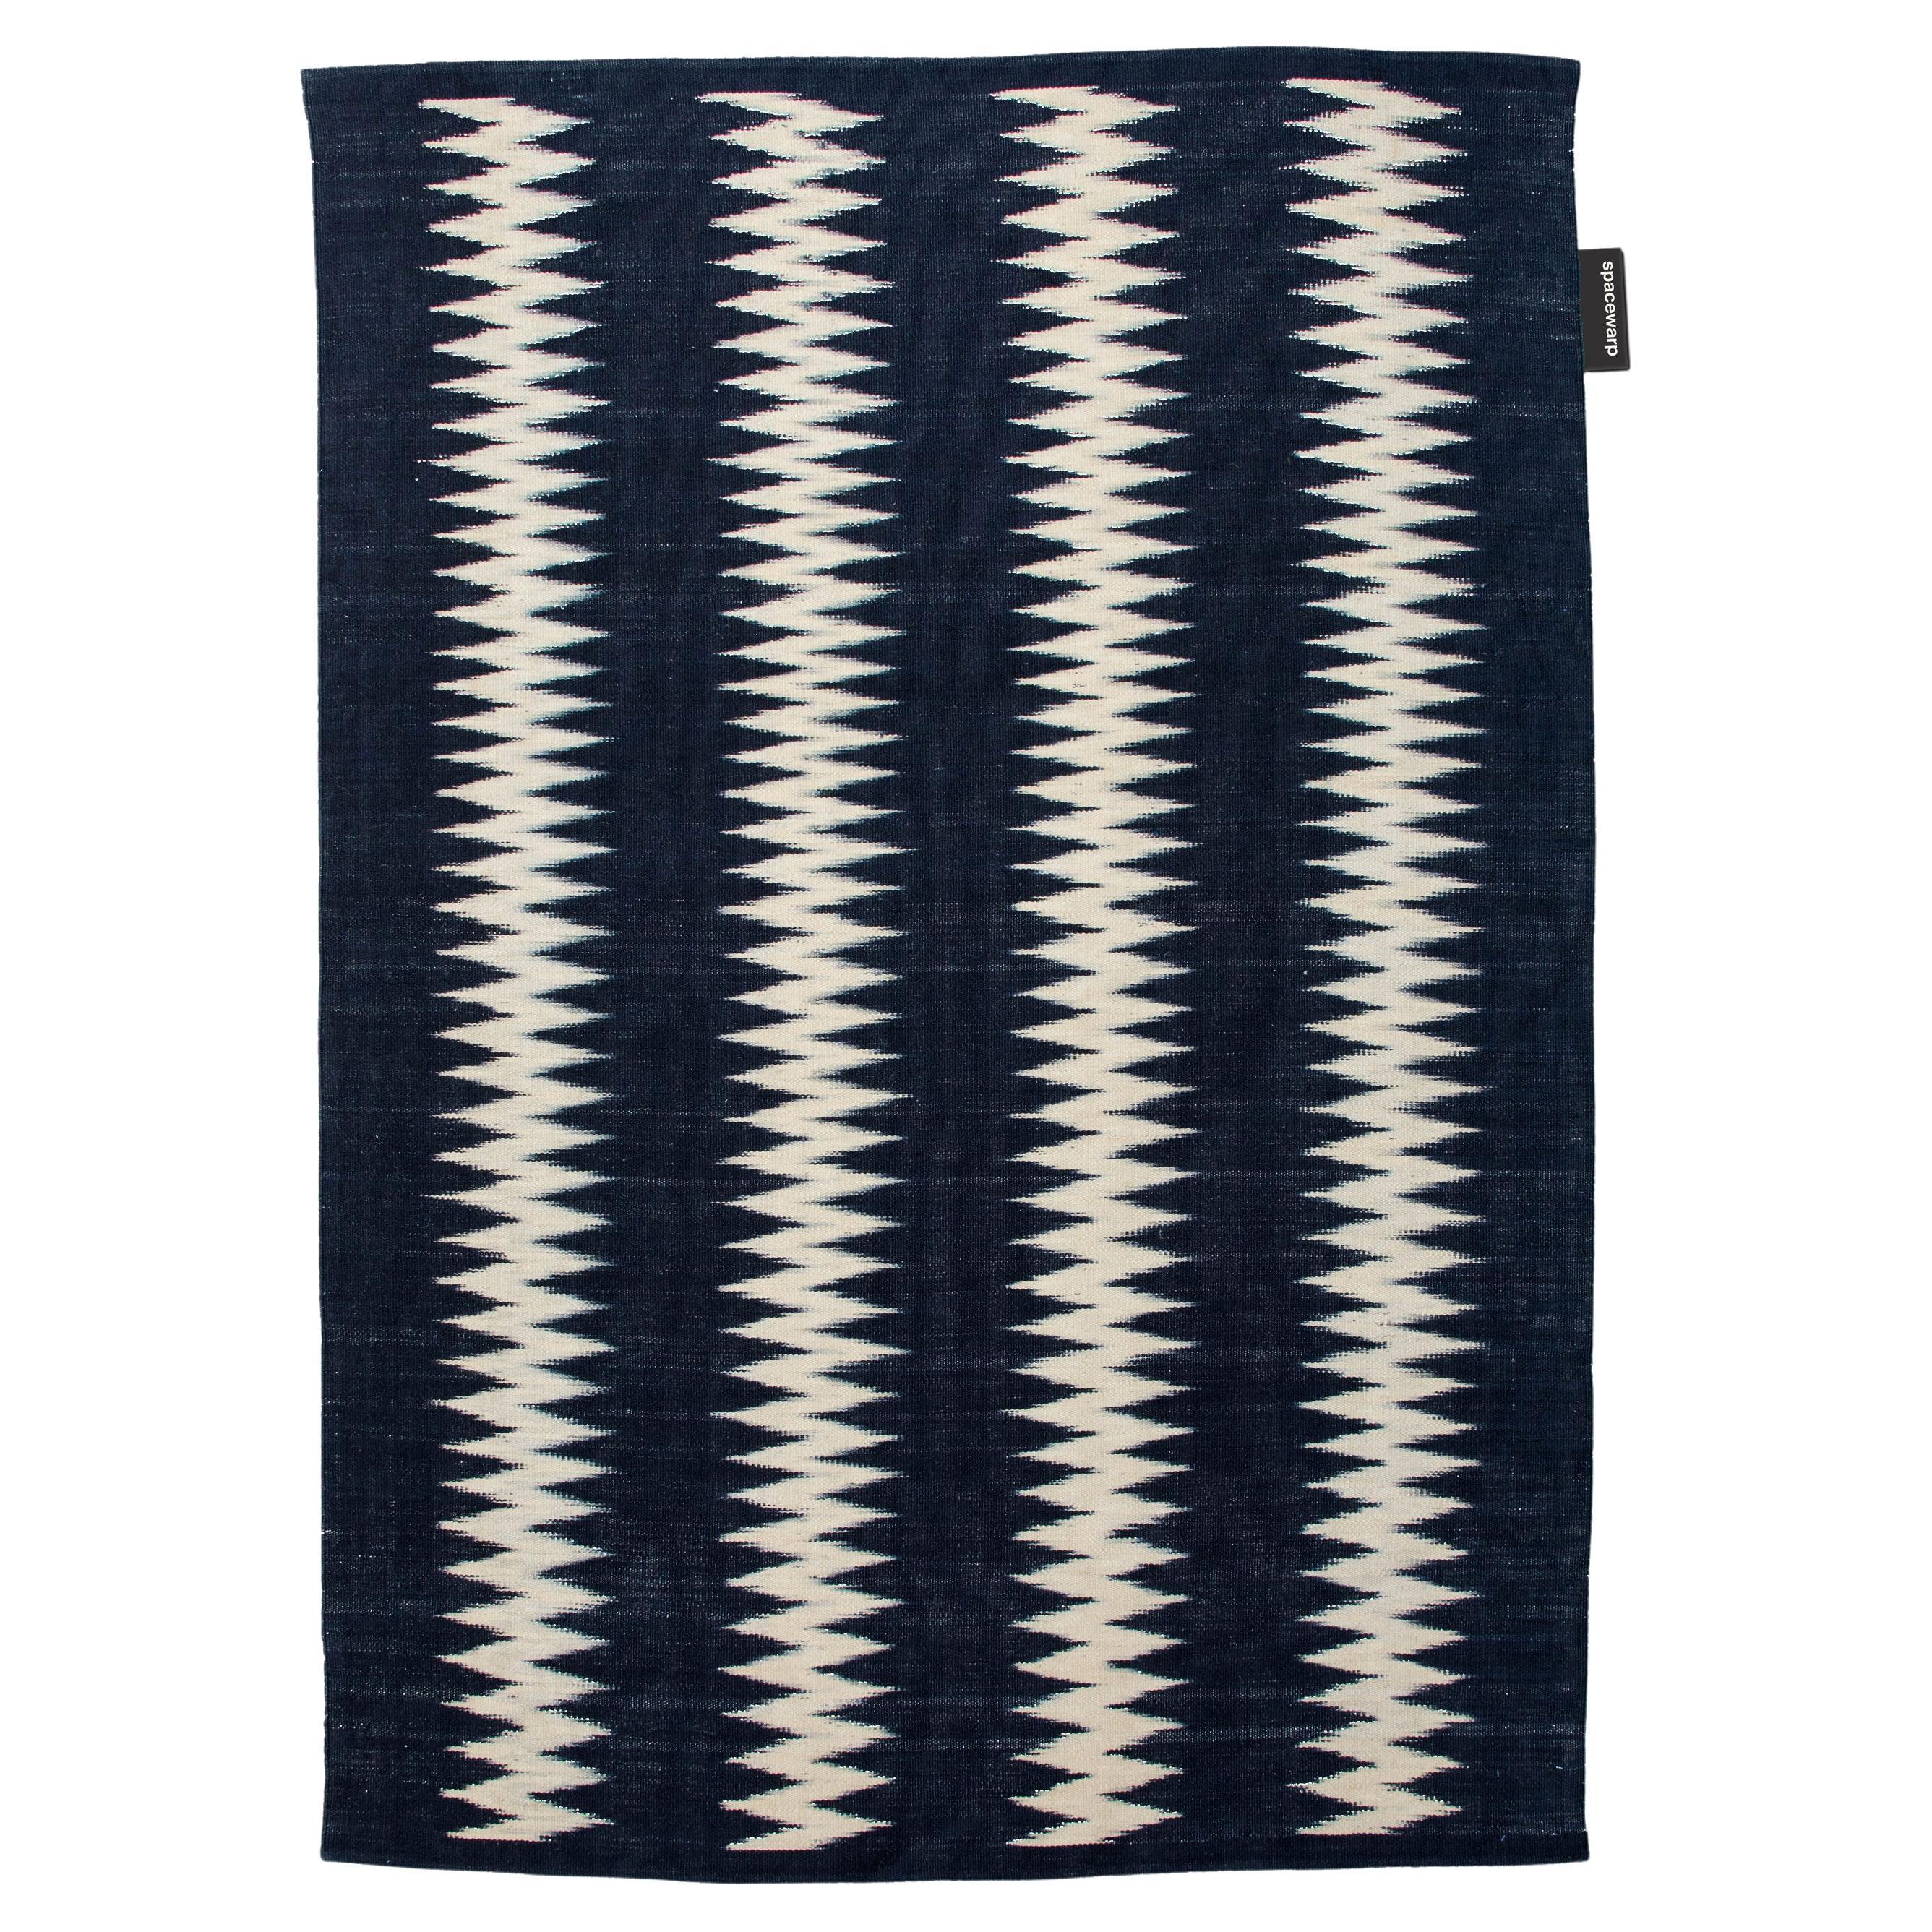 Handwoven Beating a Polygraph Rug by Spacewarp For Sale